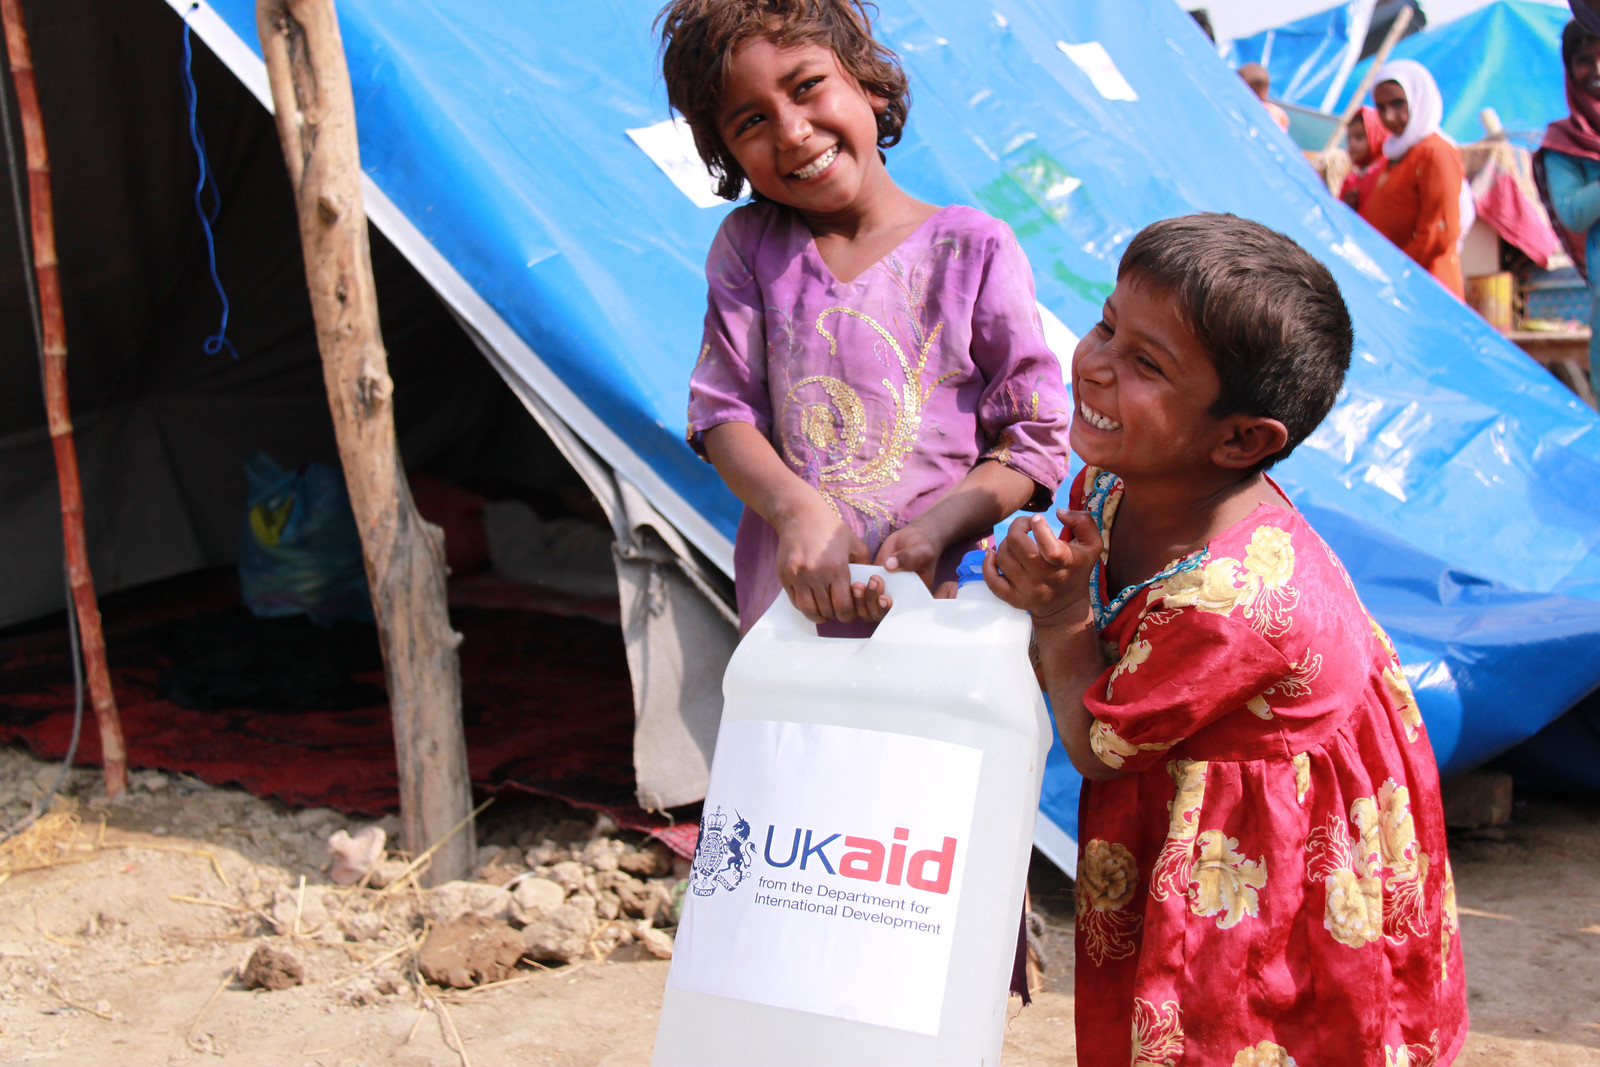 Two smiling young children in a refugee camp holding a UK aid bottle of water.